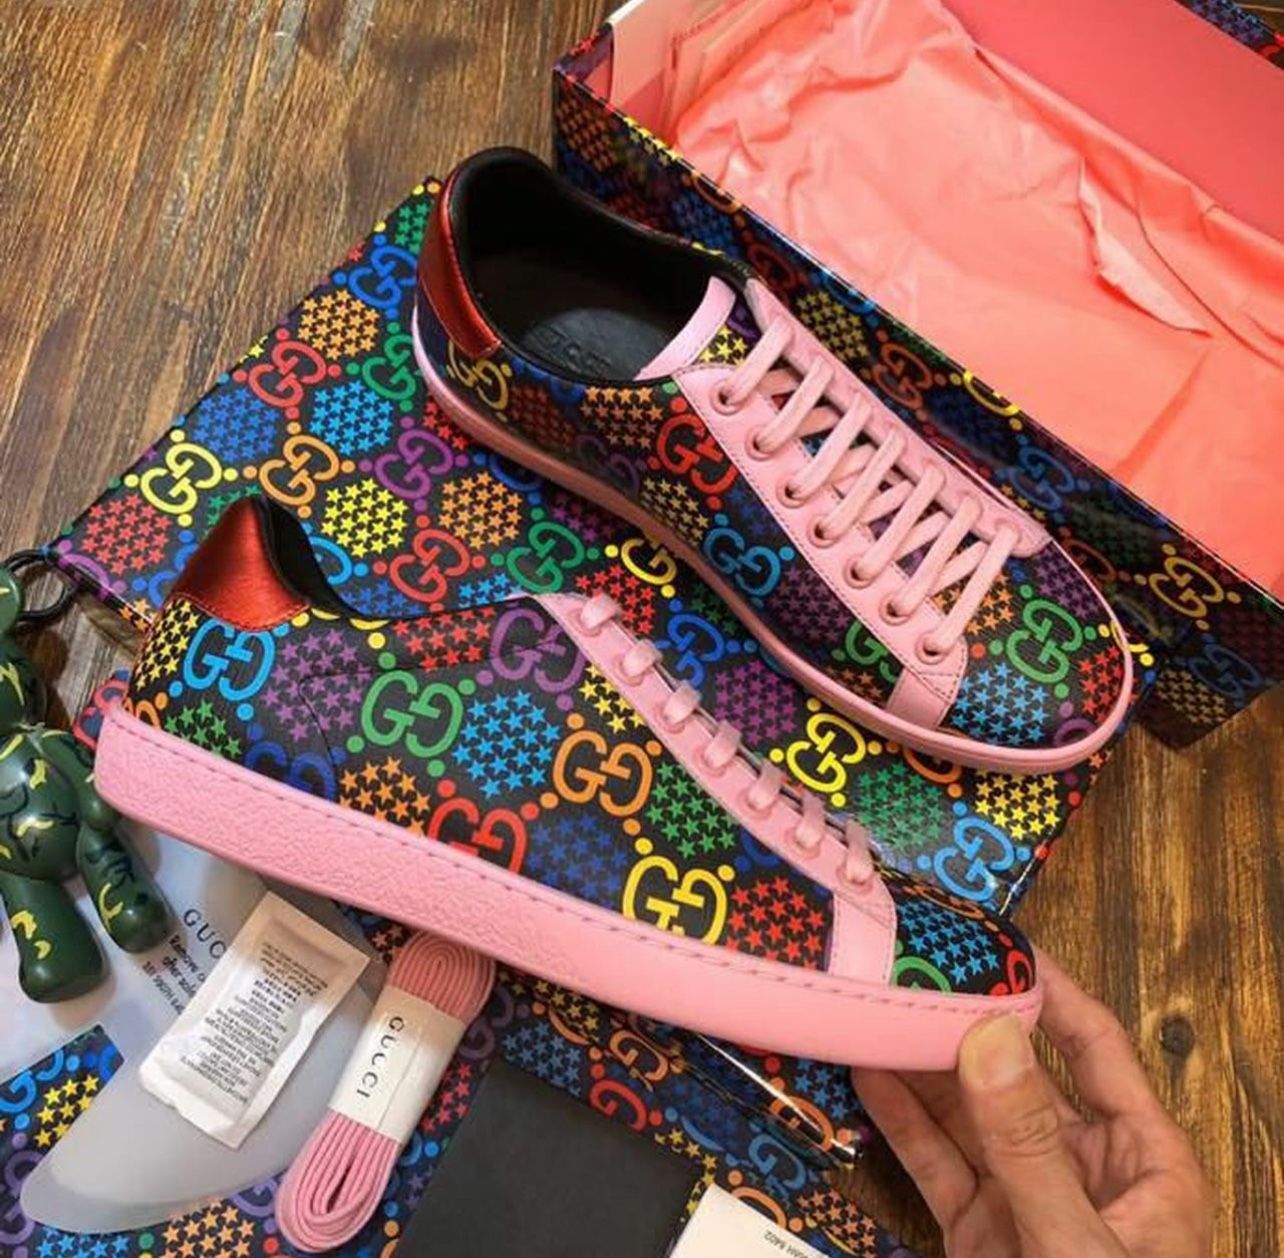 Gucci Psychedelic Ace Sneakers 603697 Calfskin Leather Spring/Summer 2020 Collection, Pink Women Shoes (Read Description Below)